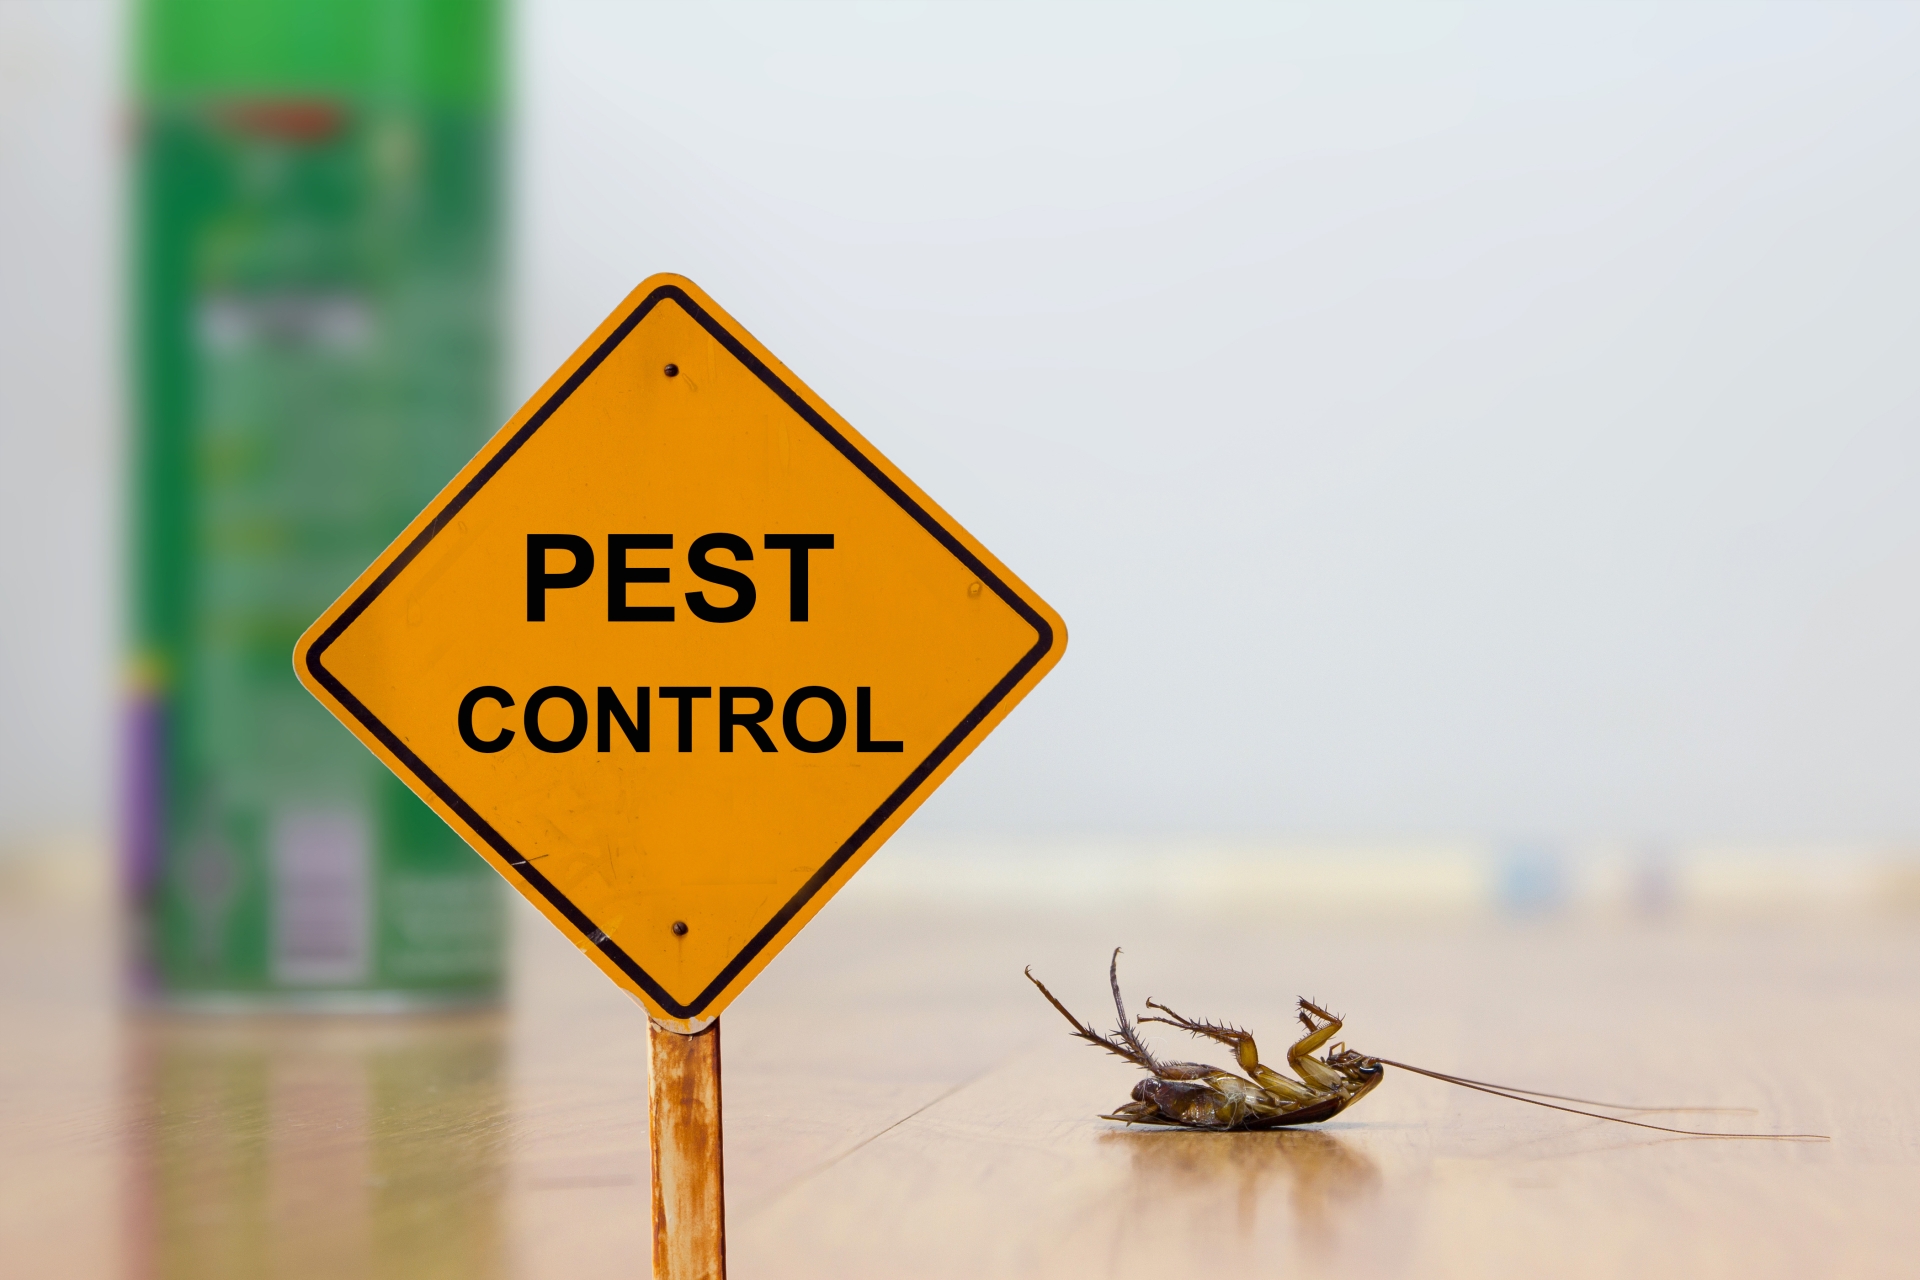 24 Hour Pest Control, Pest Control in Downside, Cobham, Stoke d'Abernon, KT11. Call Now 020 8166 9746